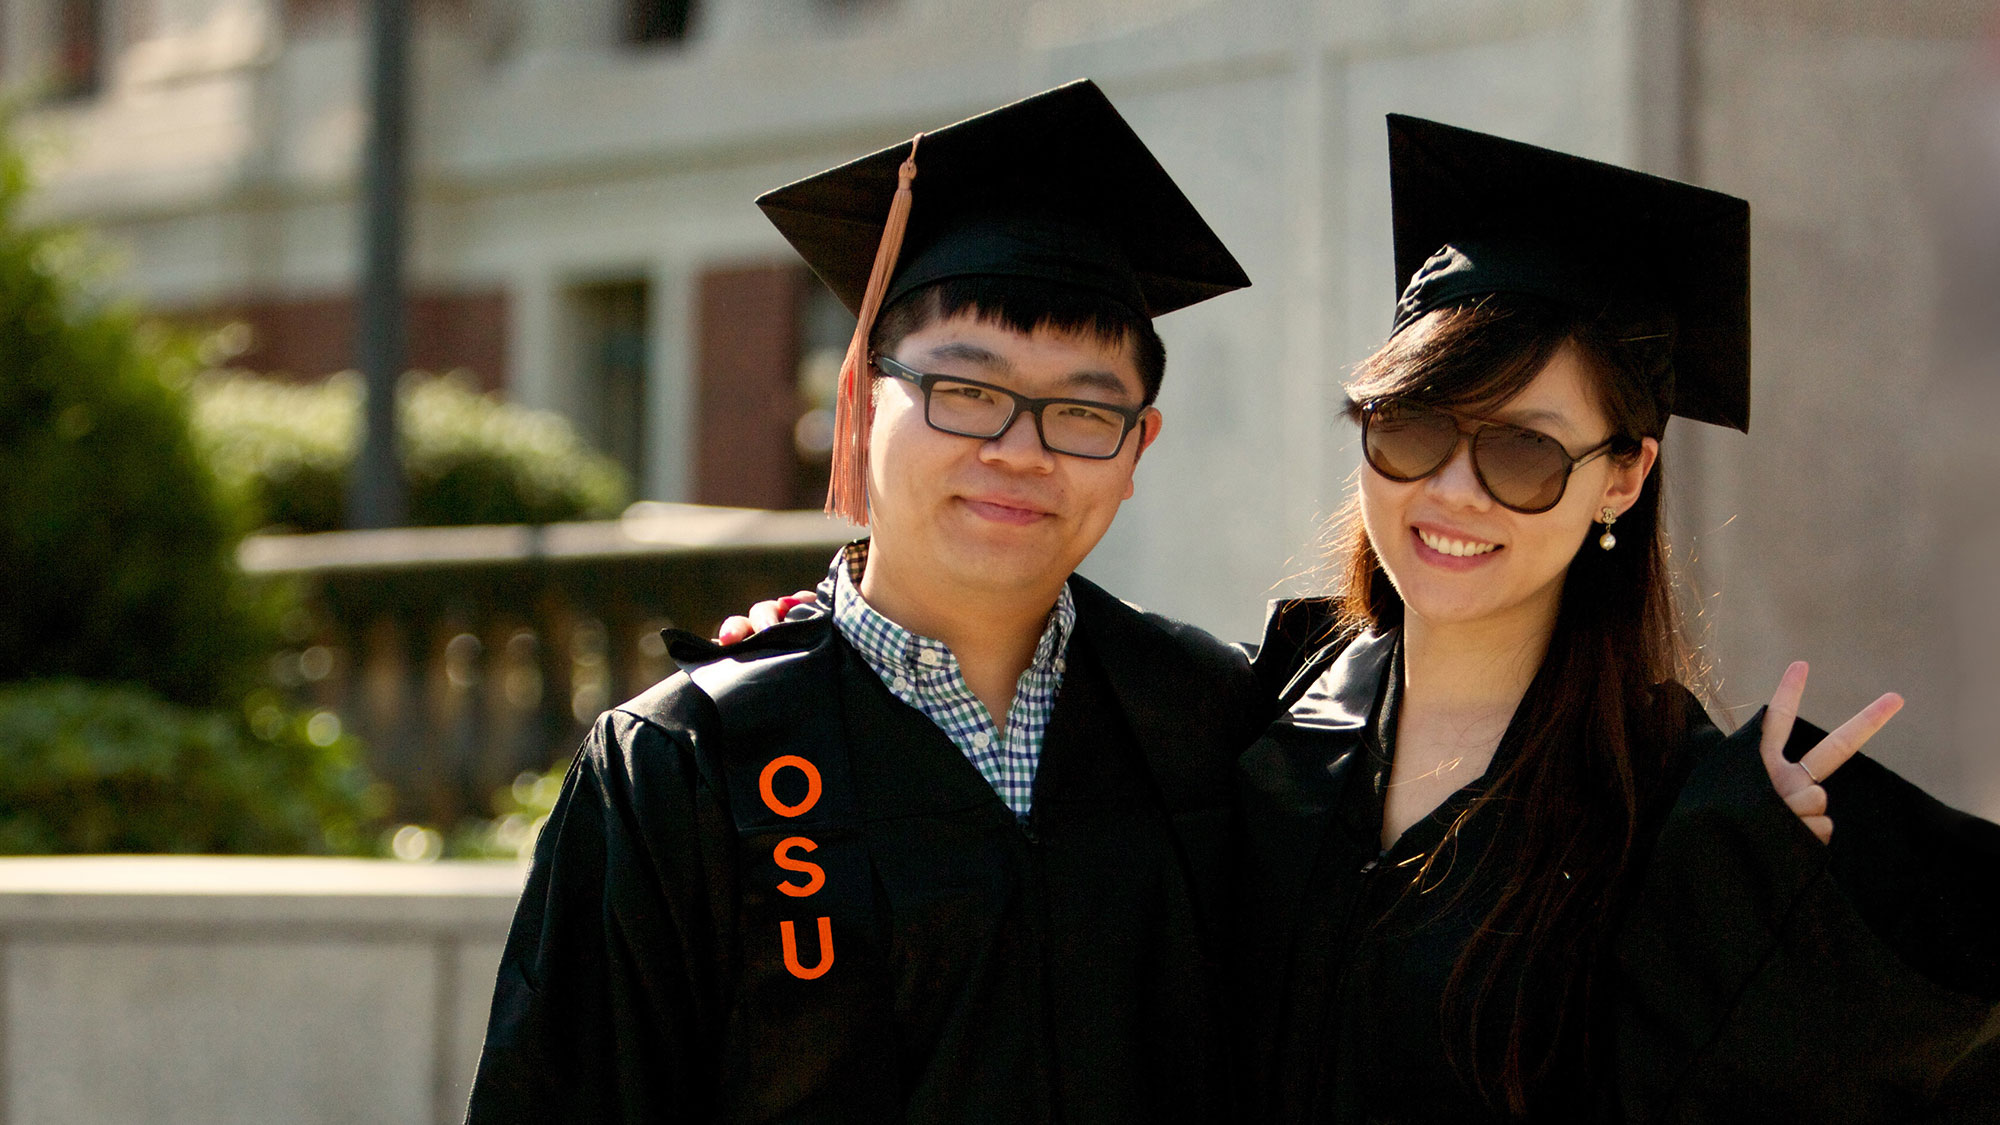 International students at Oregon State University wear cap and gown at graduation ceremony.